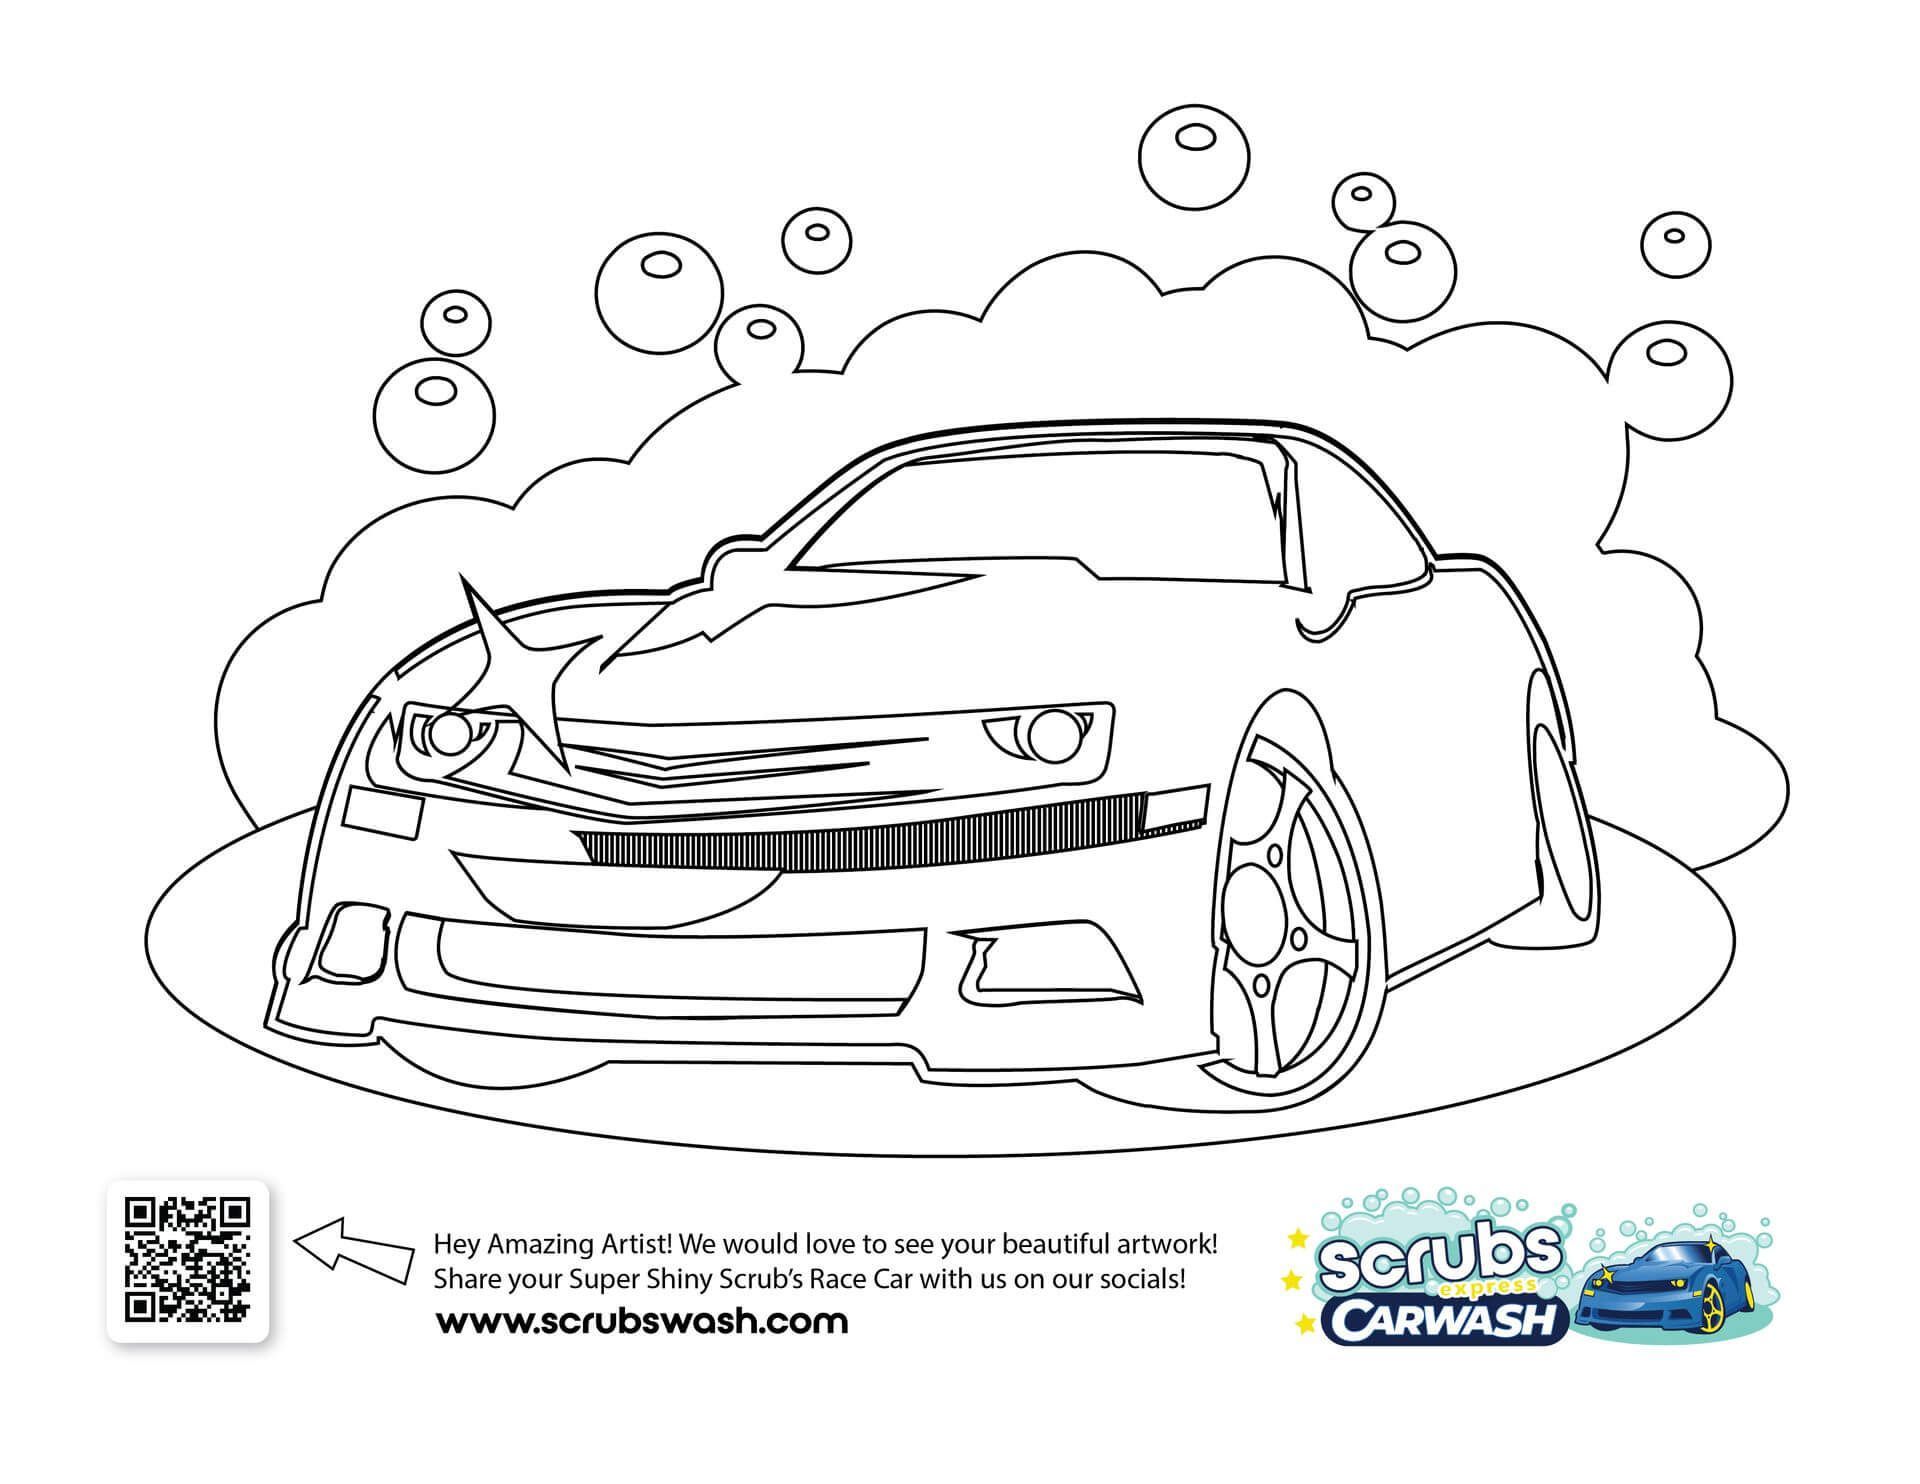 Free download and print coloring pages of Scrub's Carwash car from Scrubs Carwash. A black and white drawing of a car with bubbles around it for kids and adults to color.